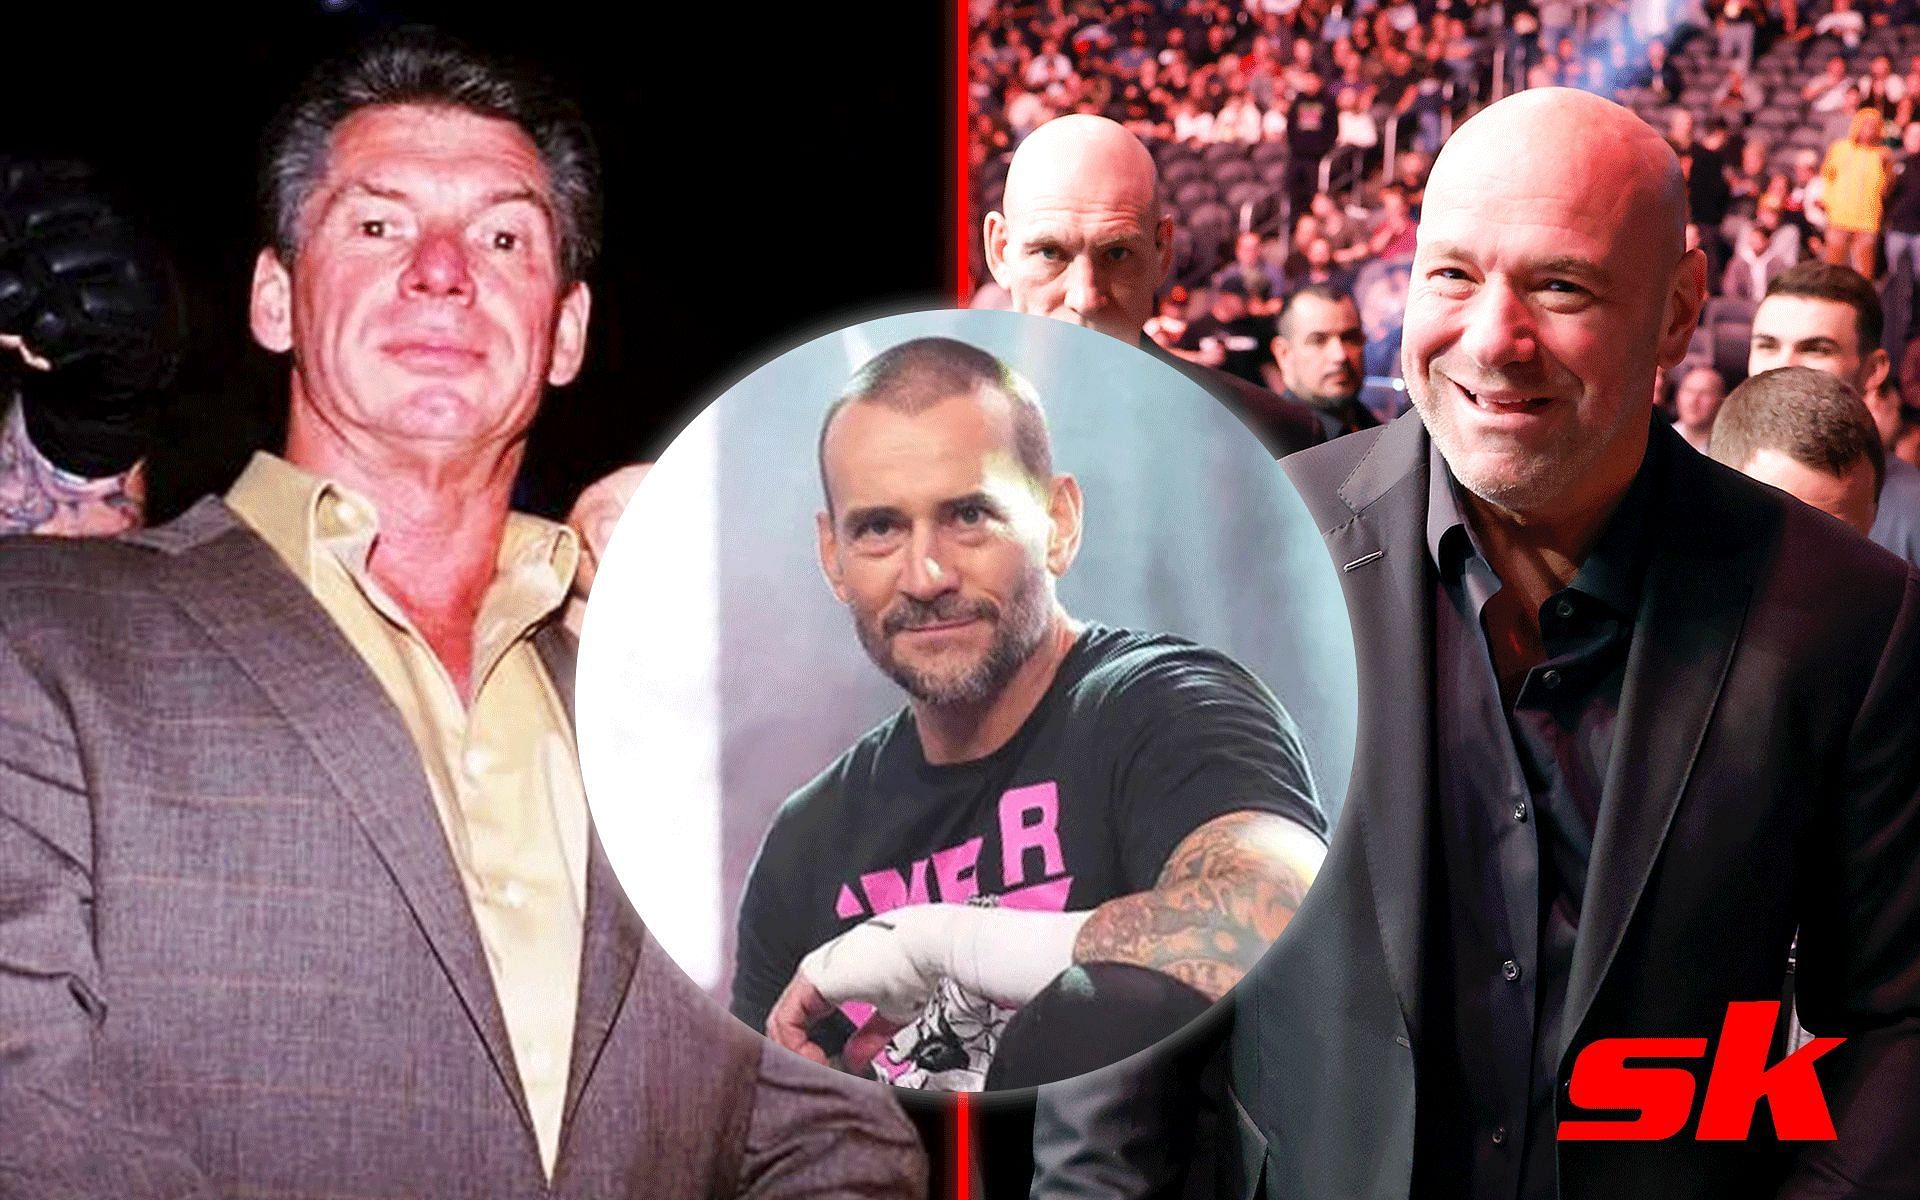 Vince McMahon (left), CM Punk (middle) and Dana White (right) [Image credits: @WrestlingWCC and @290KfzBG on Twitter]